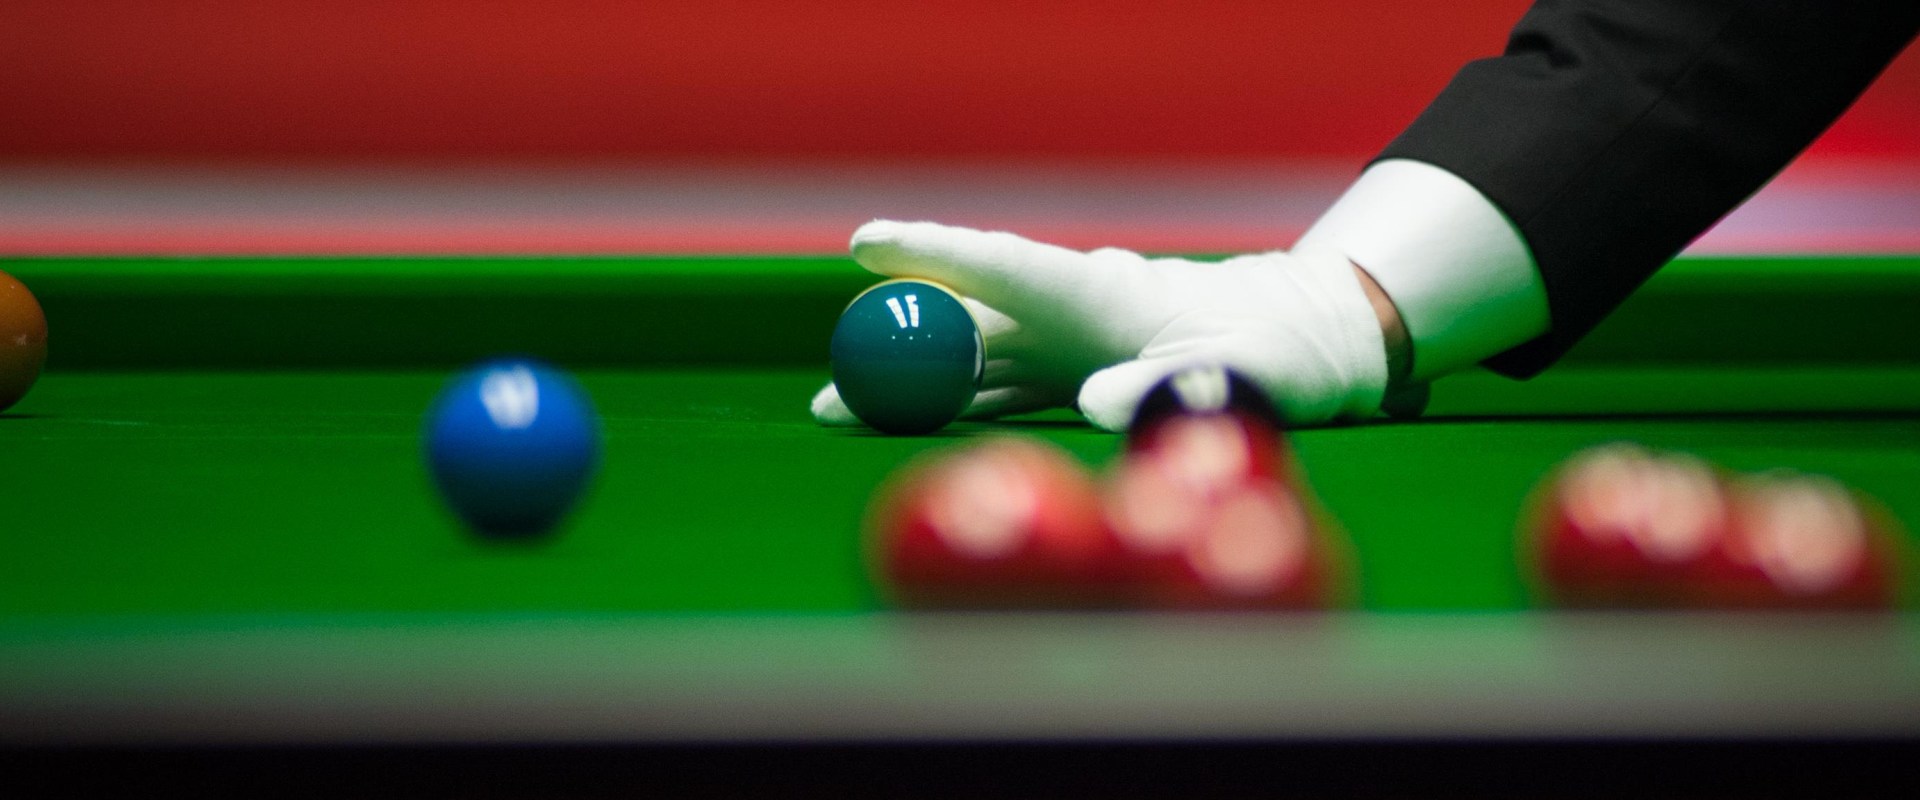 What cue ball do professionals use?